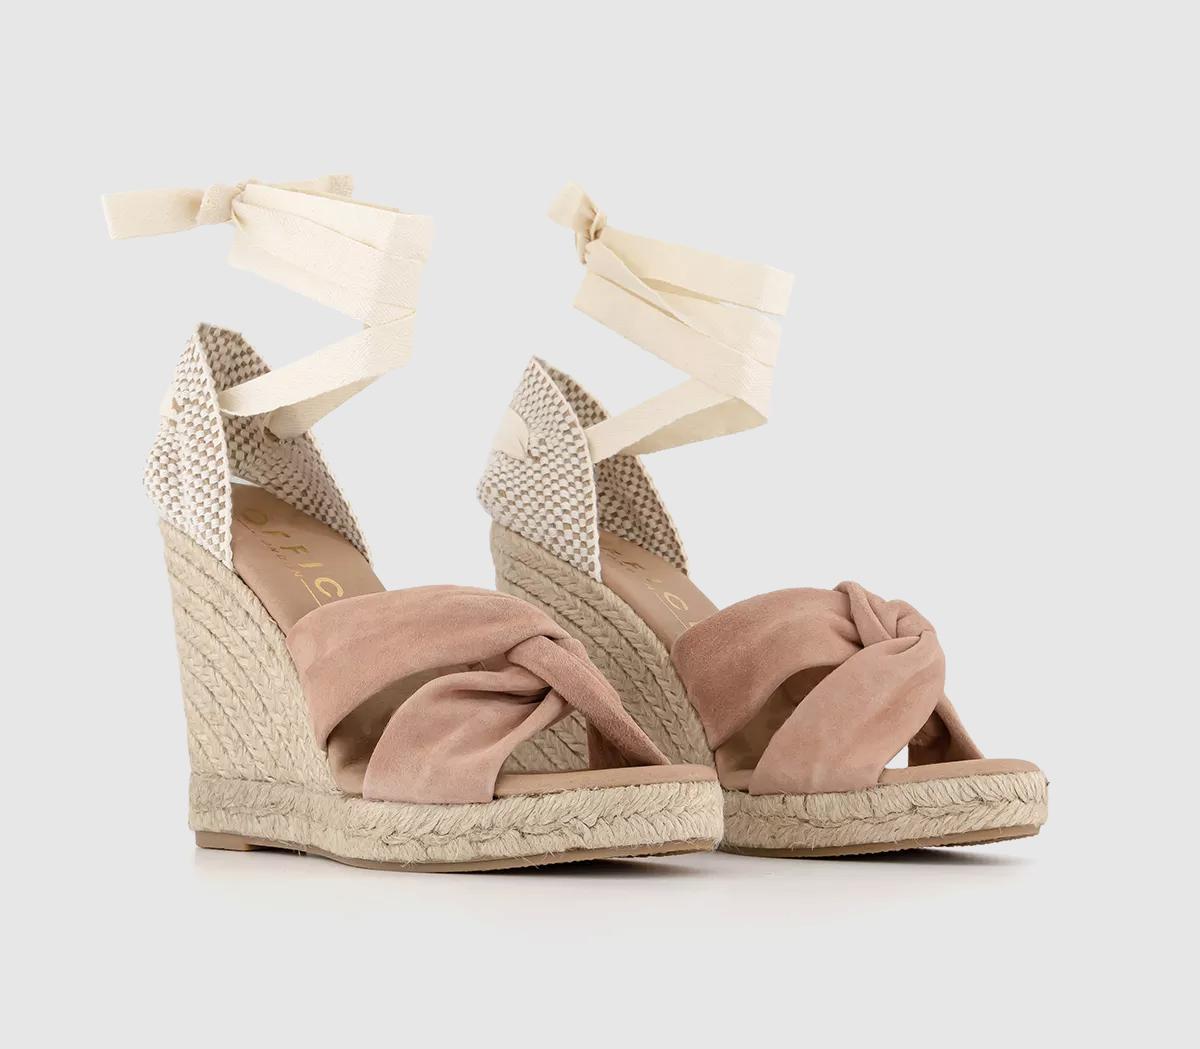 OFFICE Womens Heather Ankle Tie Espadrilles Blush Suede Natural, 4